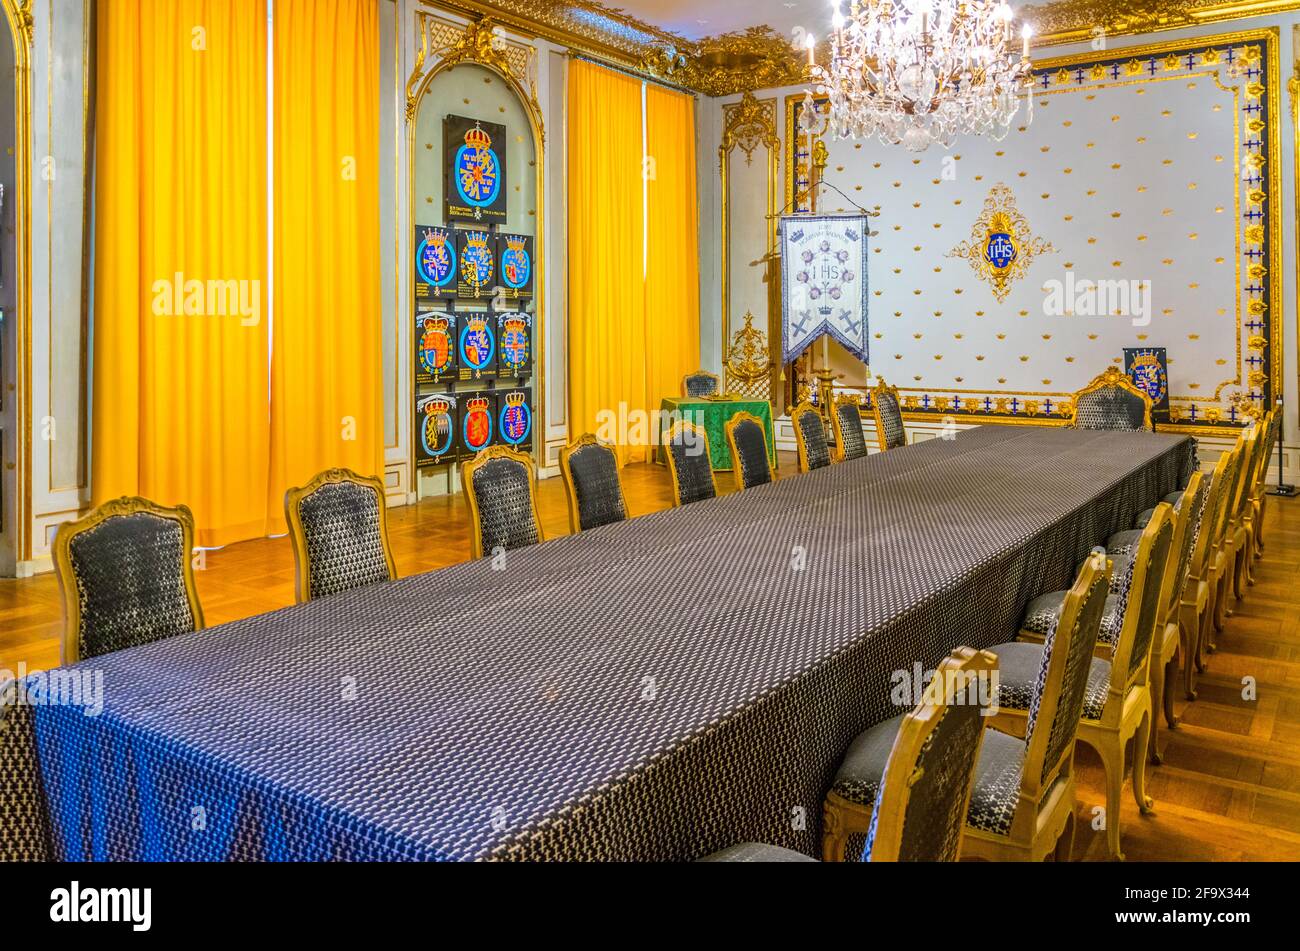 STOCKHOLM, SWEDEN, AUGUST 18, 2016: View of the dining hall of the Kungliga slottet castle in Gamla Stan, Stockholm, Sweden Stock Photo